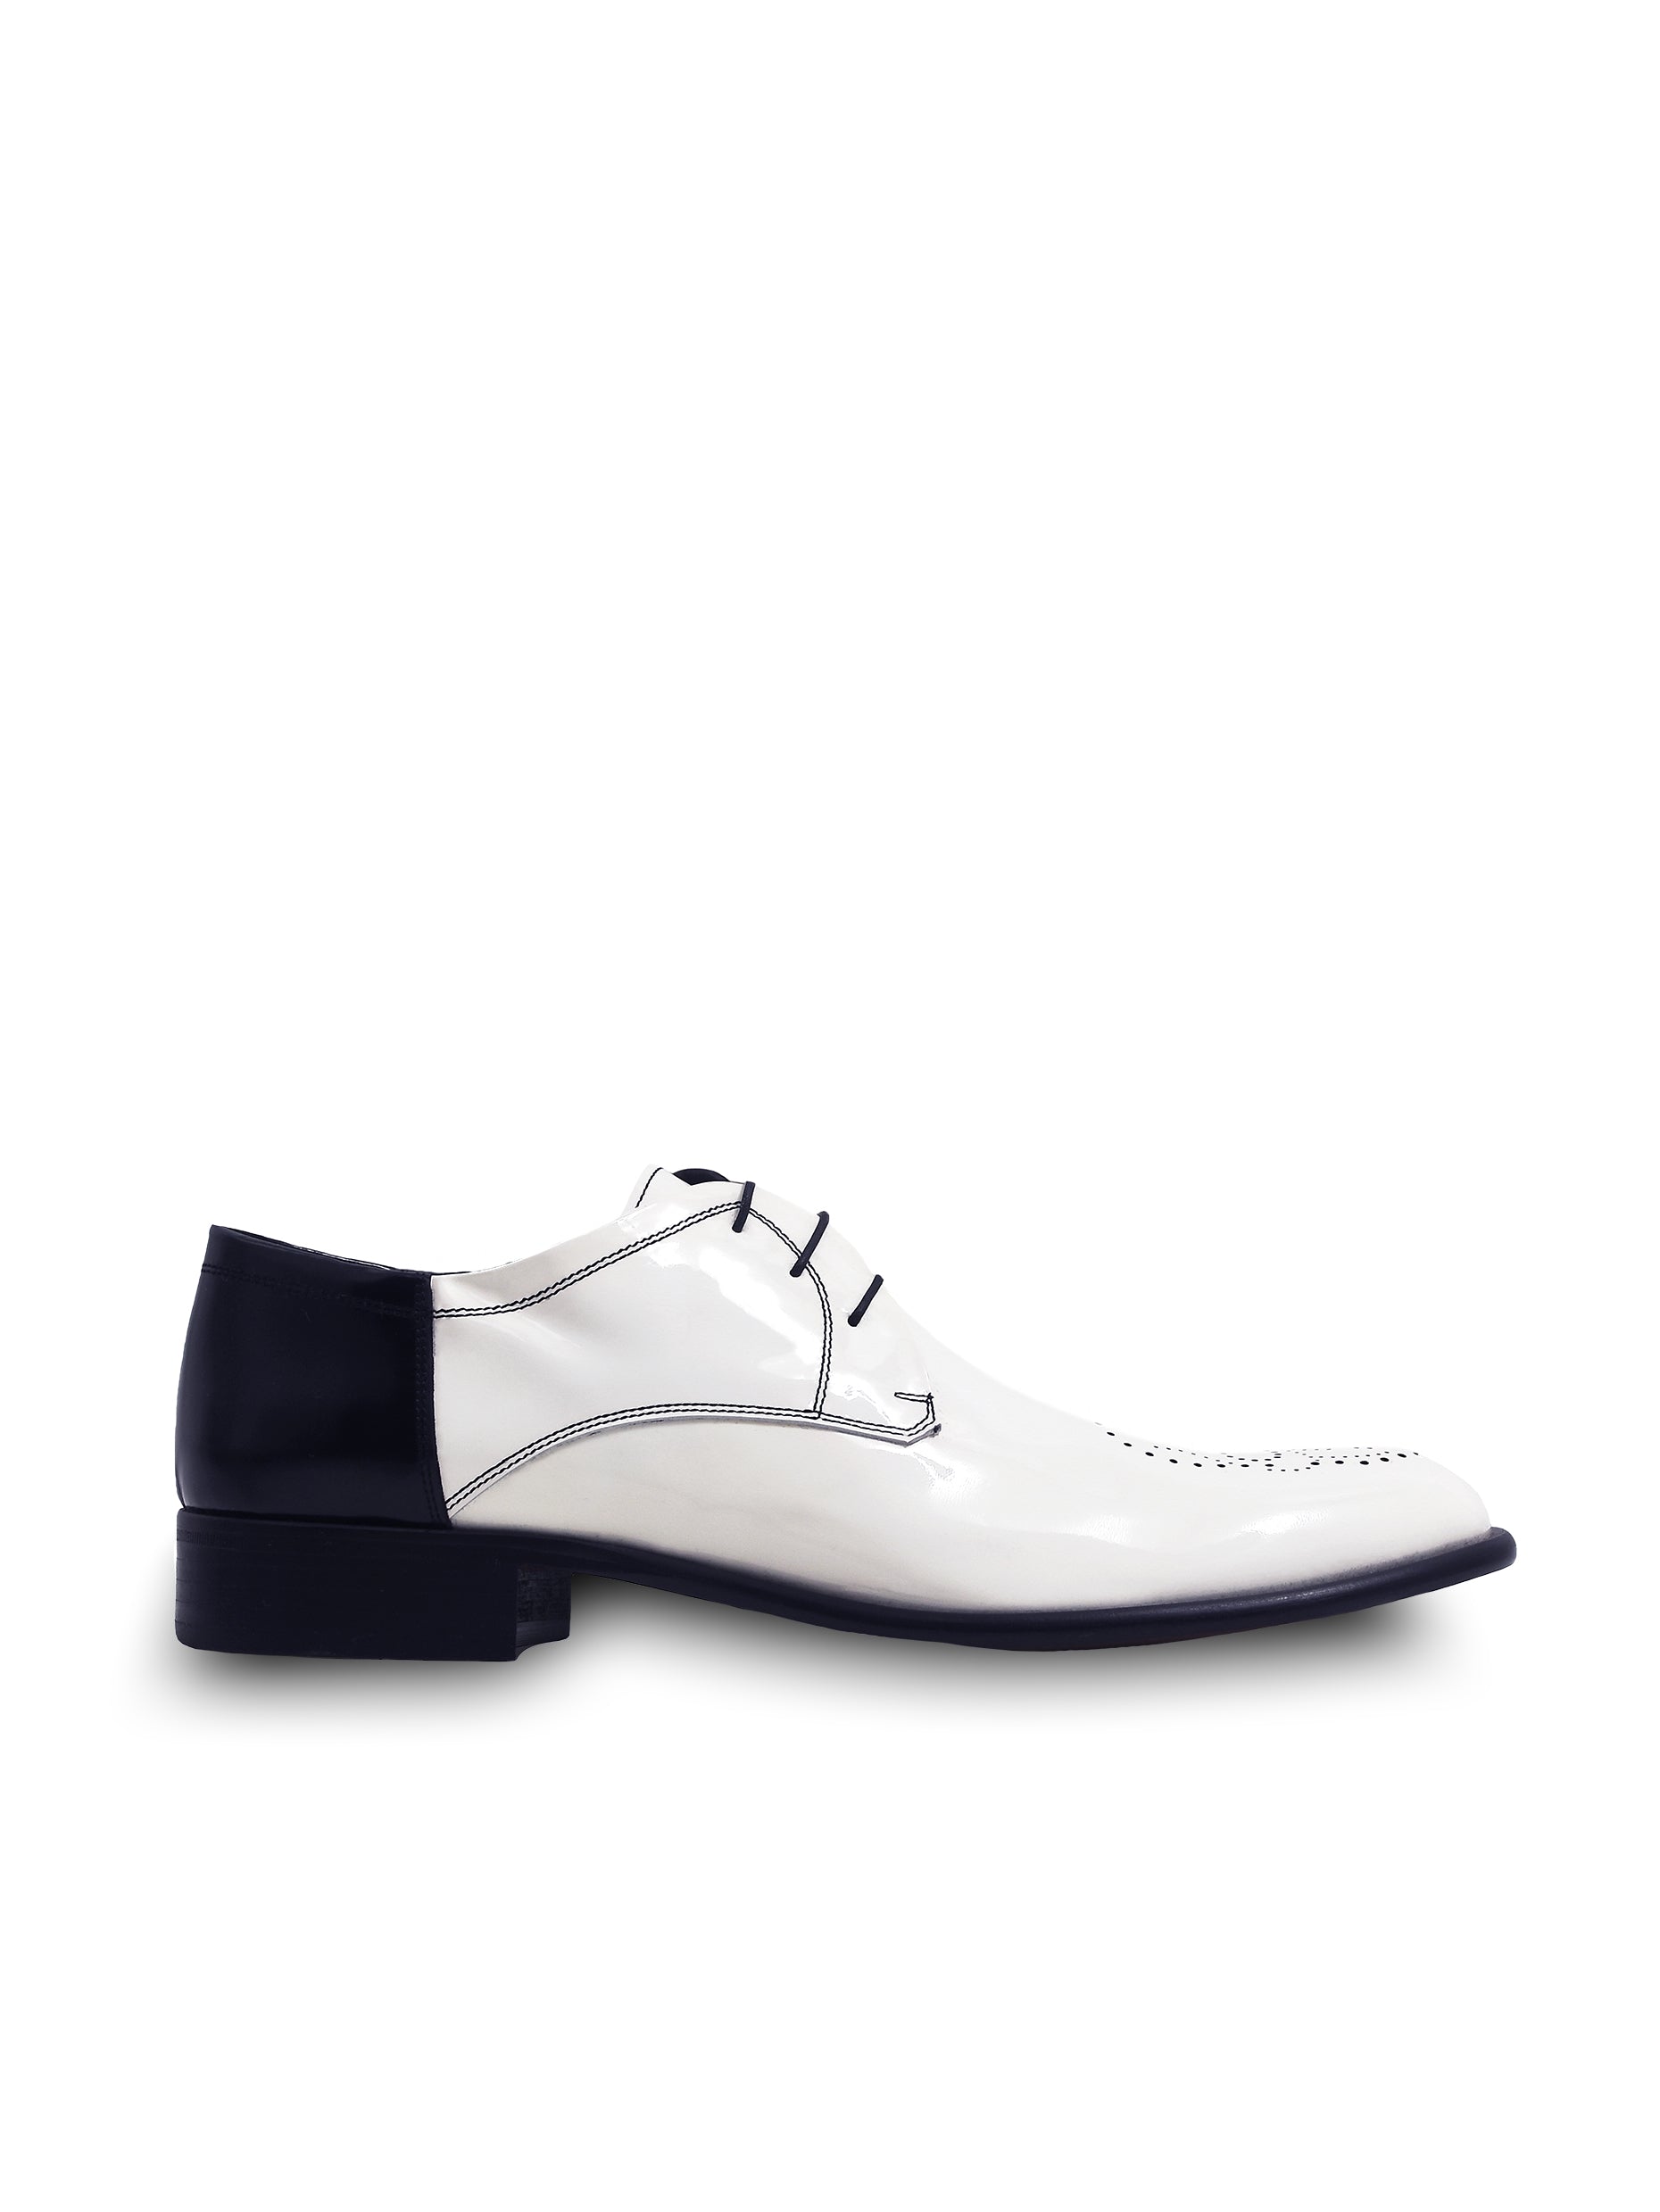 UNCONDITIONAL MENS LEATHER SKULL SHOES IN WHITE